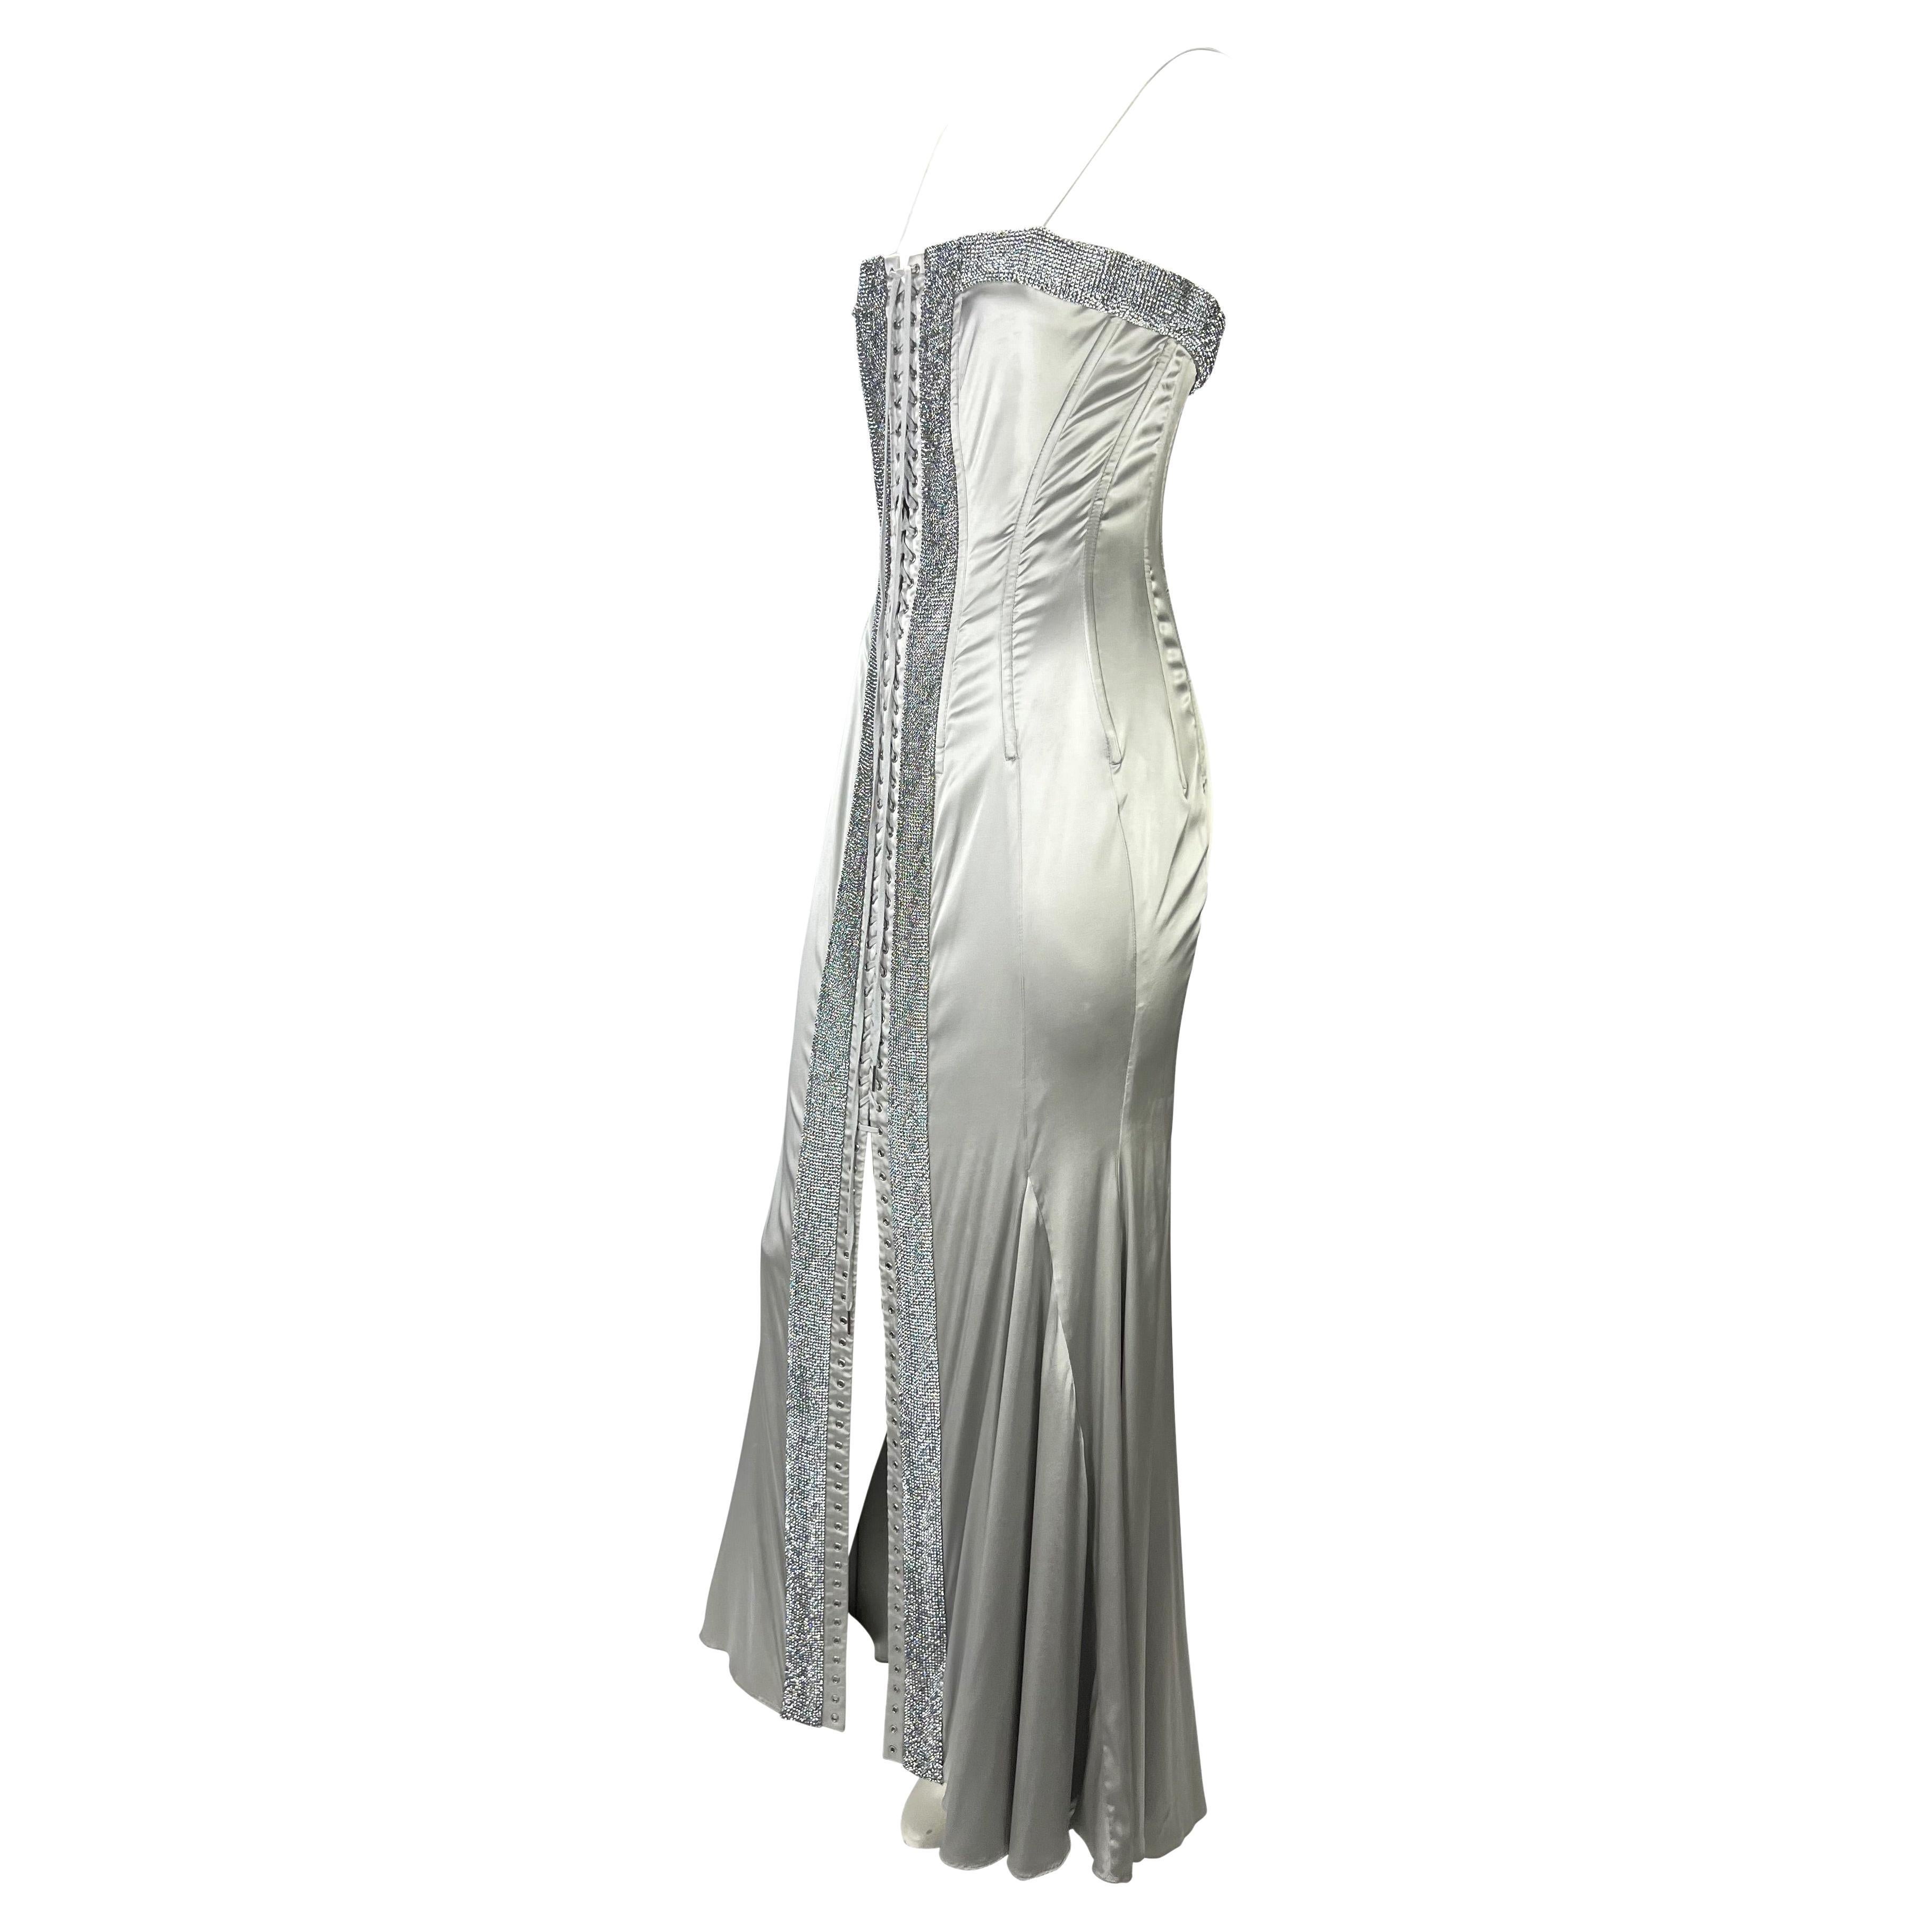 S/S 2004 Dolce & Gabbana Runway Rhinestone Lace-Up Silver Stretch Satin Gown 3